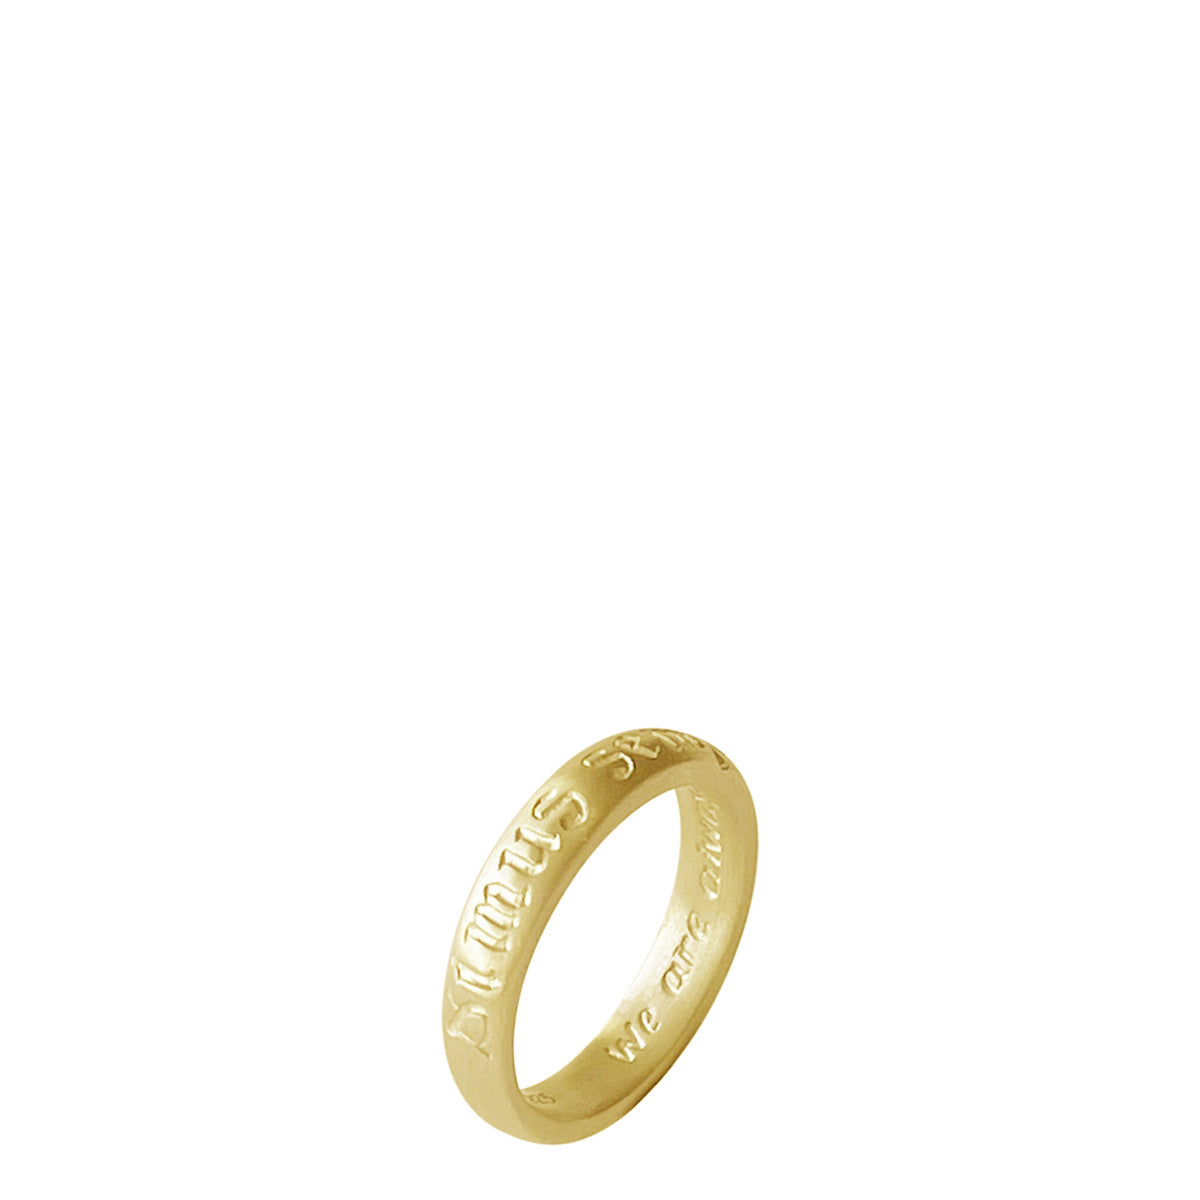 18K Gold Latin We Are Always In Process Ring